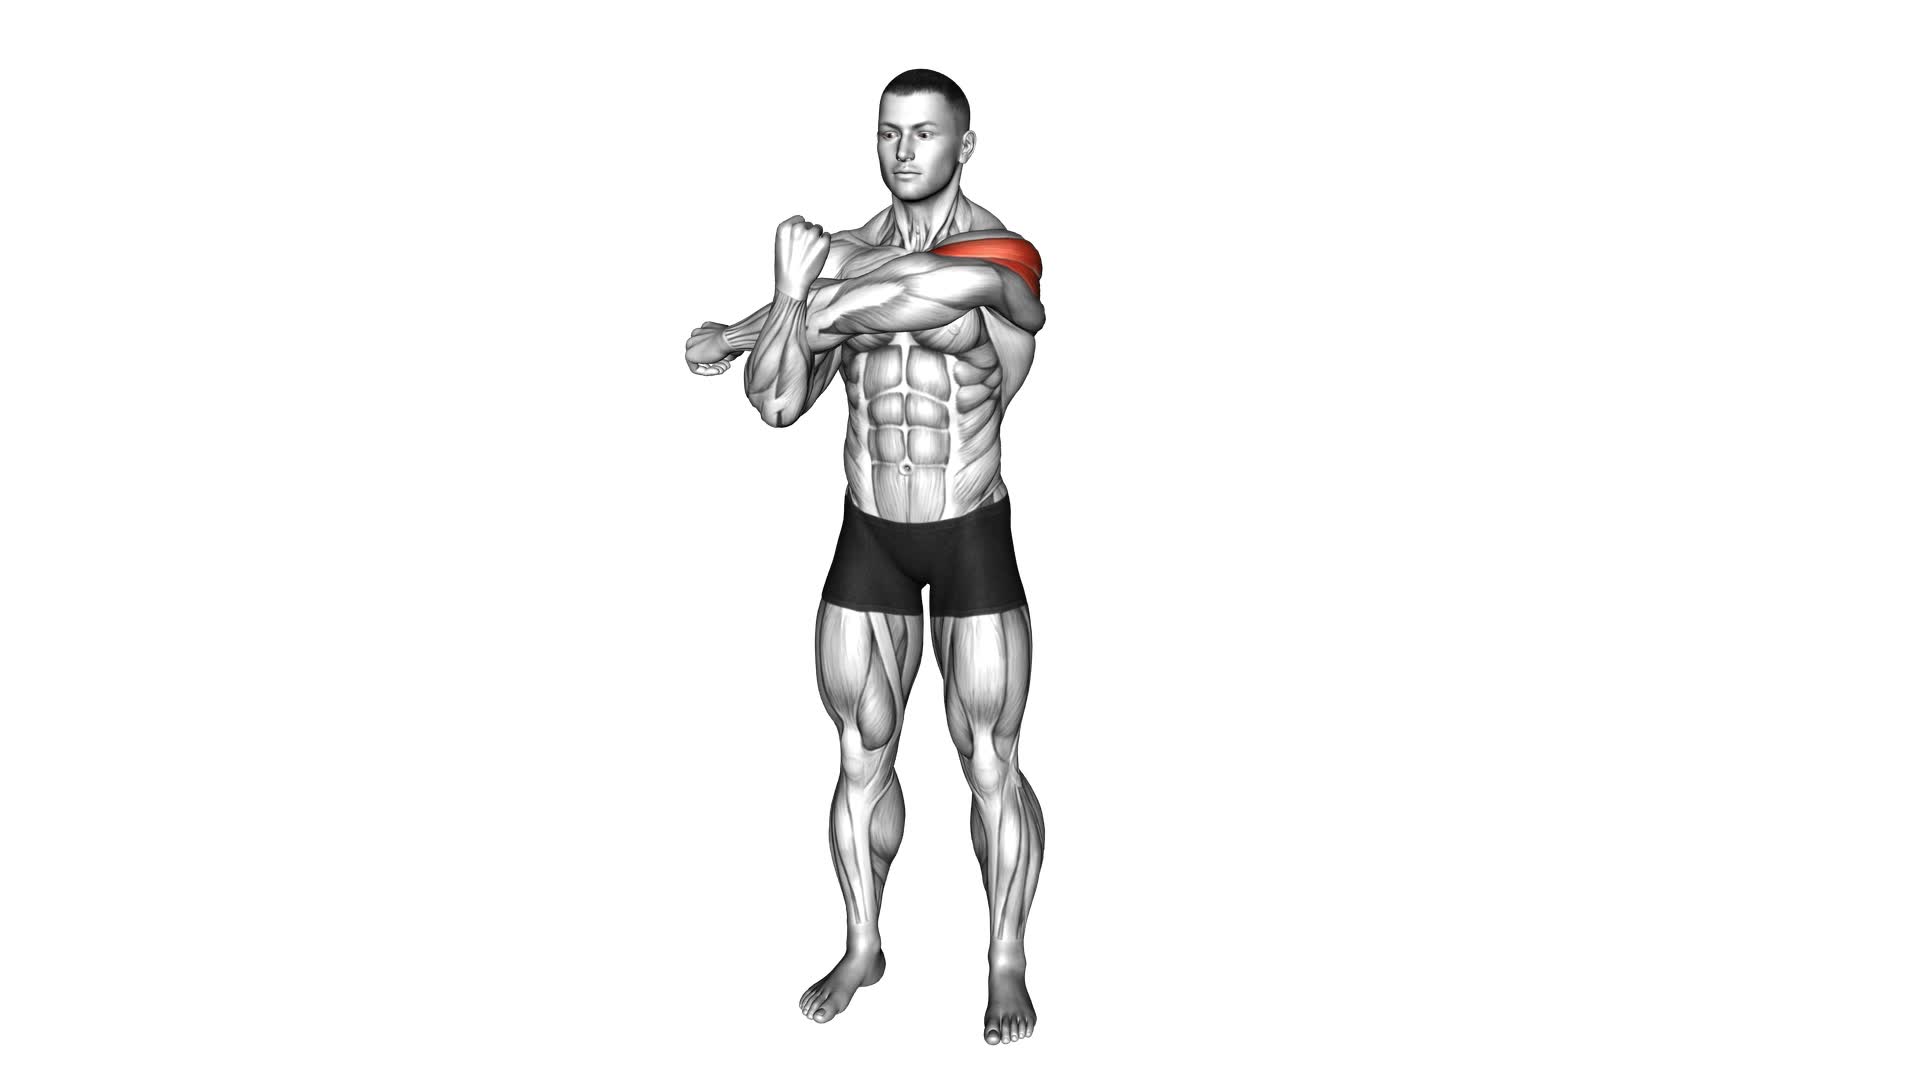 Across Chest Shoulder Stretch - Video Exercise Guide & Tips